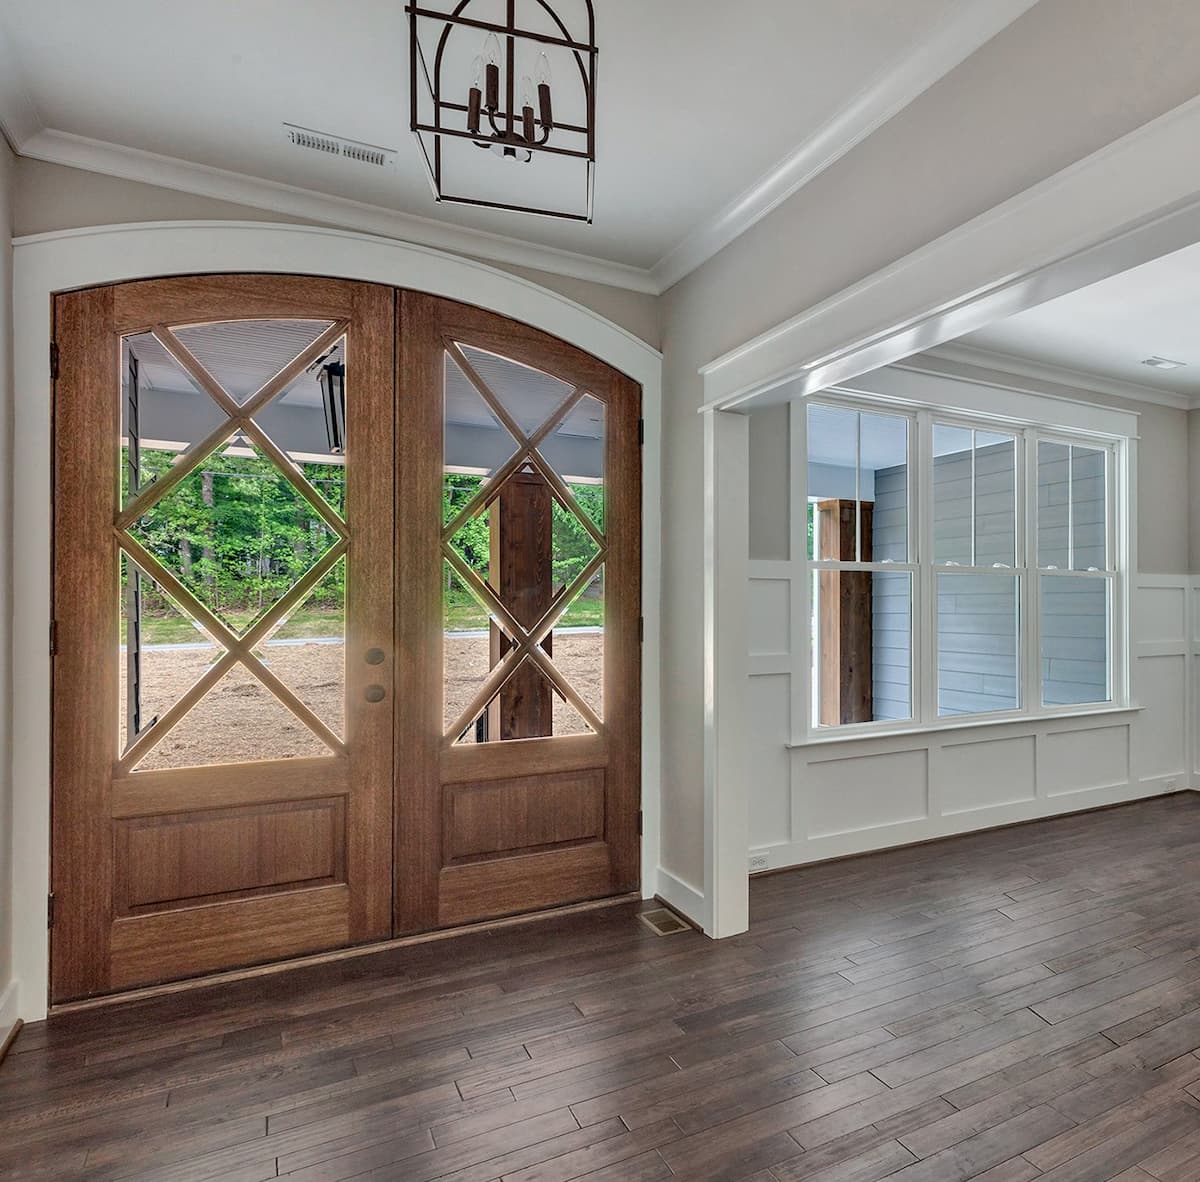 Foyer with view to double wood entry doors and three white double-hung vinyl windows